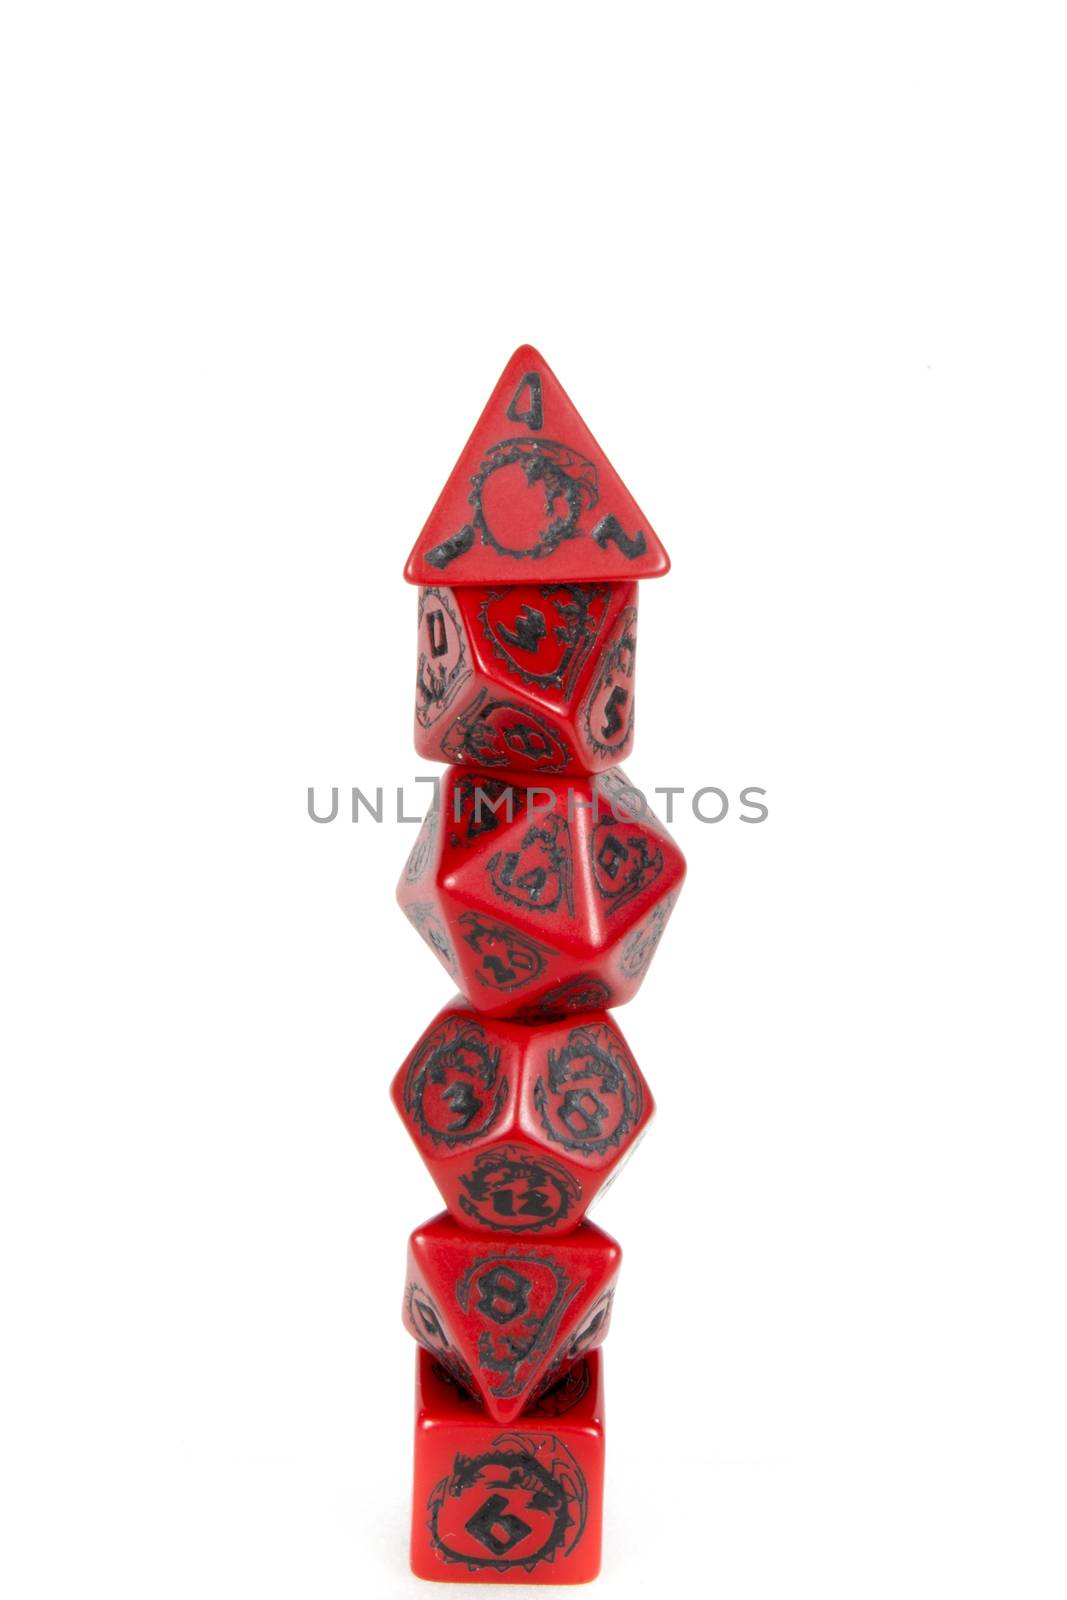 Poly dice tower red and black by bluiten